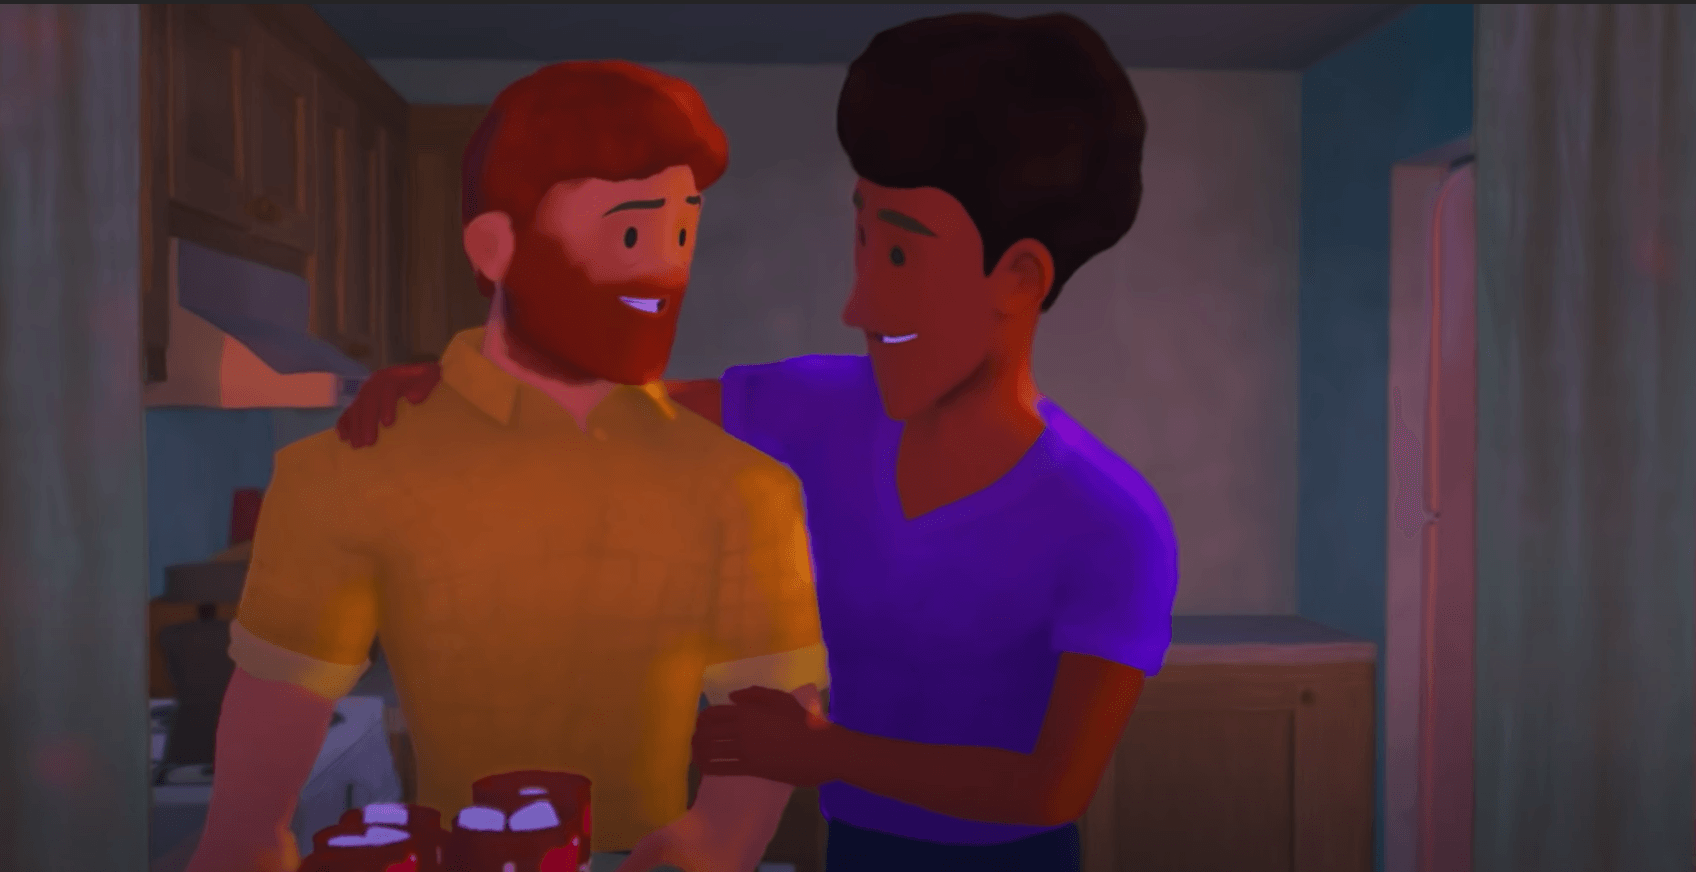 Russia warns Disney against short film featuring gay character